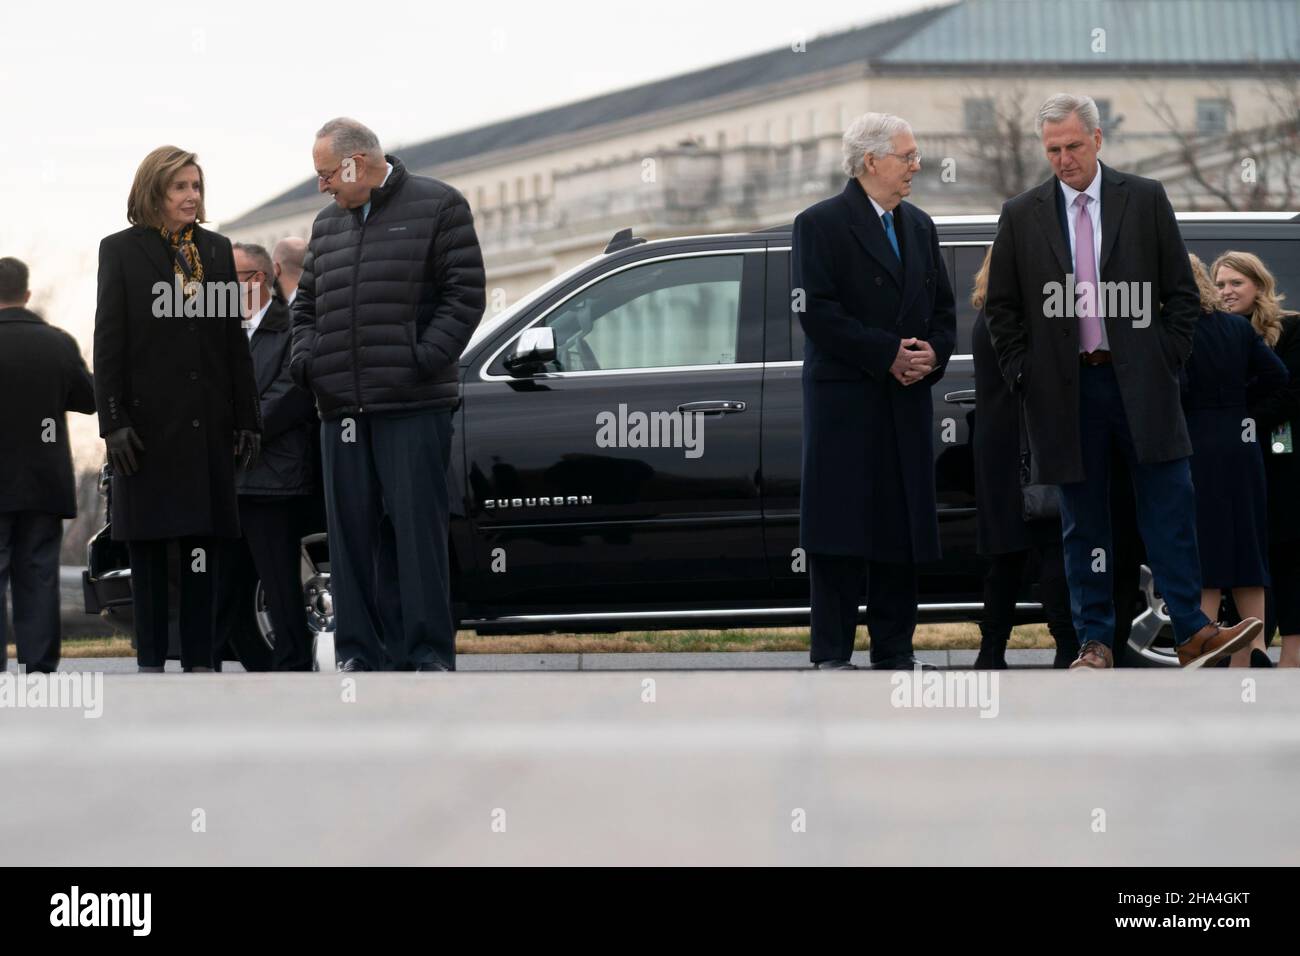 Speaker Nancy Pelosi (D-Calif.), Majority Leader Charles Schumer (D-N.Y.), Minority Leader Mitch McConnell (R-Ky.) and House Minority Leader Kevin McCarthy (R-Calif.) are seen before a military honor guard carries the casket of Sen. Bob Dole (R-Kan.) after lying in state at the U.S. Capitol in Washington, D.C., on Friday, December 10, 2021. Dole will be taken to Washington National Cathedral for a funeral service. (Photo by Greg Nash/Pool/Sipa USA) Stock Photo